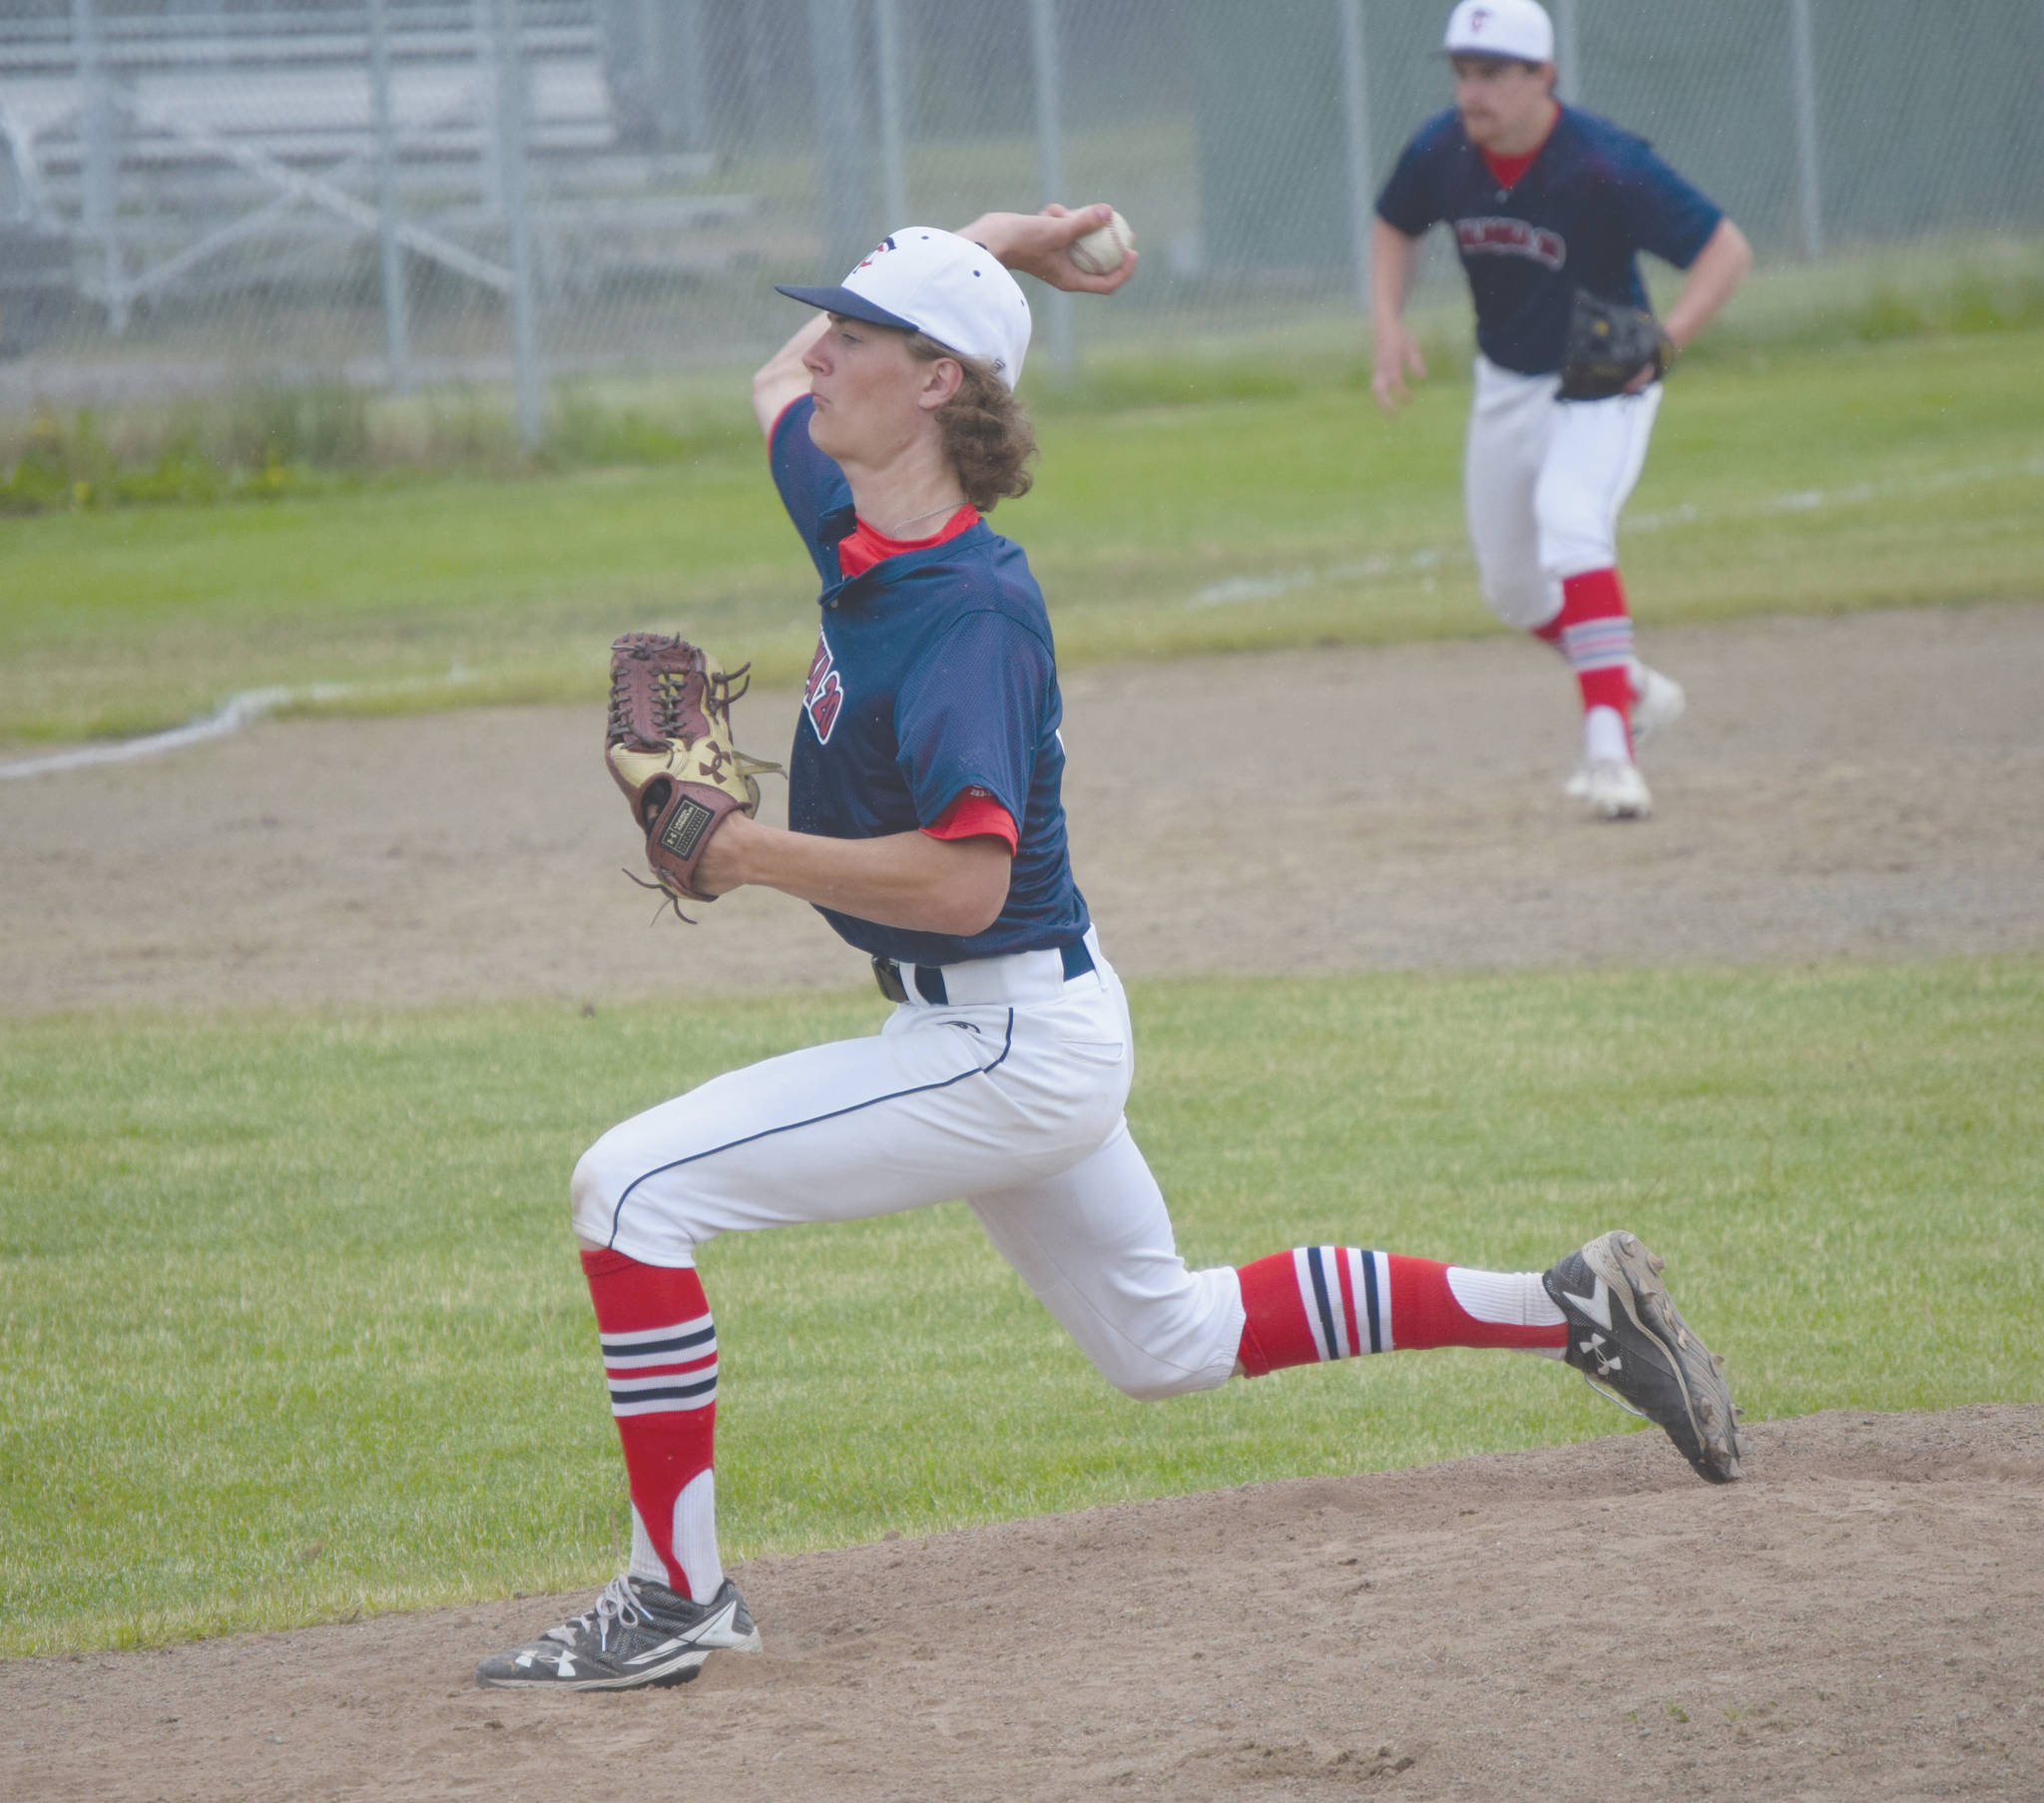 Alaska 20 relief pitcher Davey Belger delivers to Service on Tuesday, June 23, 2020, at the Kenai Little League fields in Kenai, Alaska. (Photo by Jeff Helminiak/Peninsula Clarion)